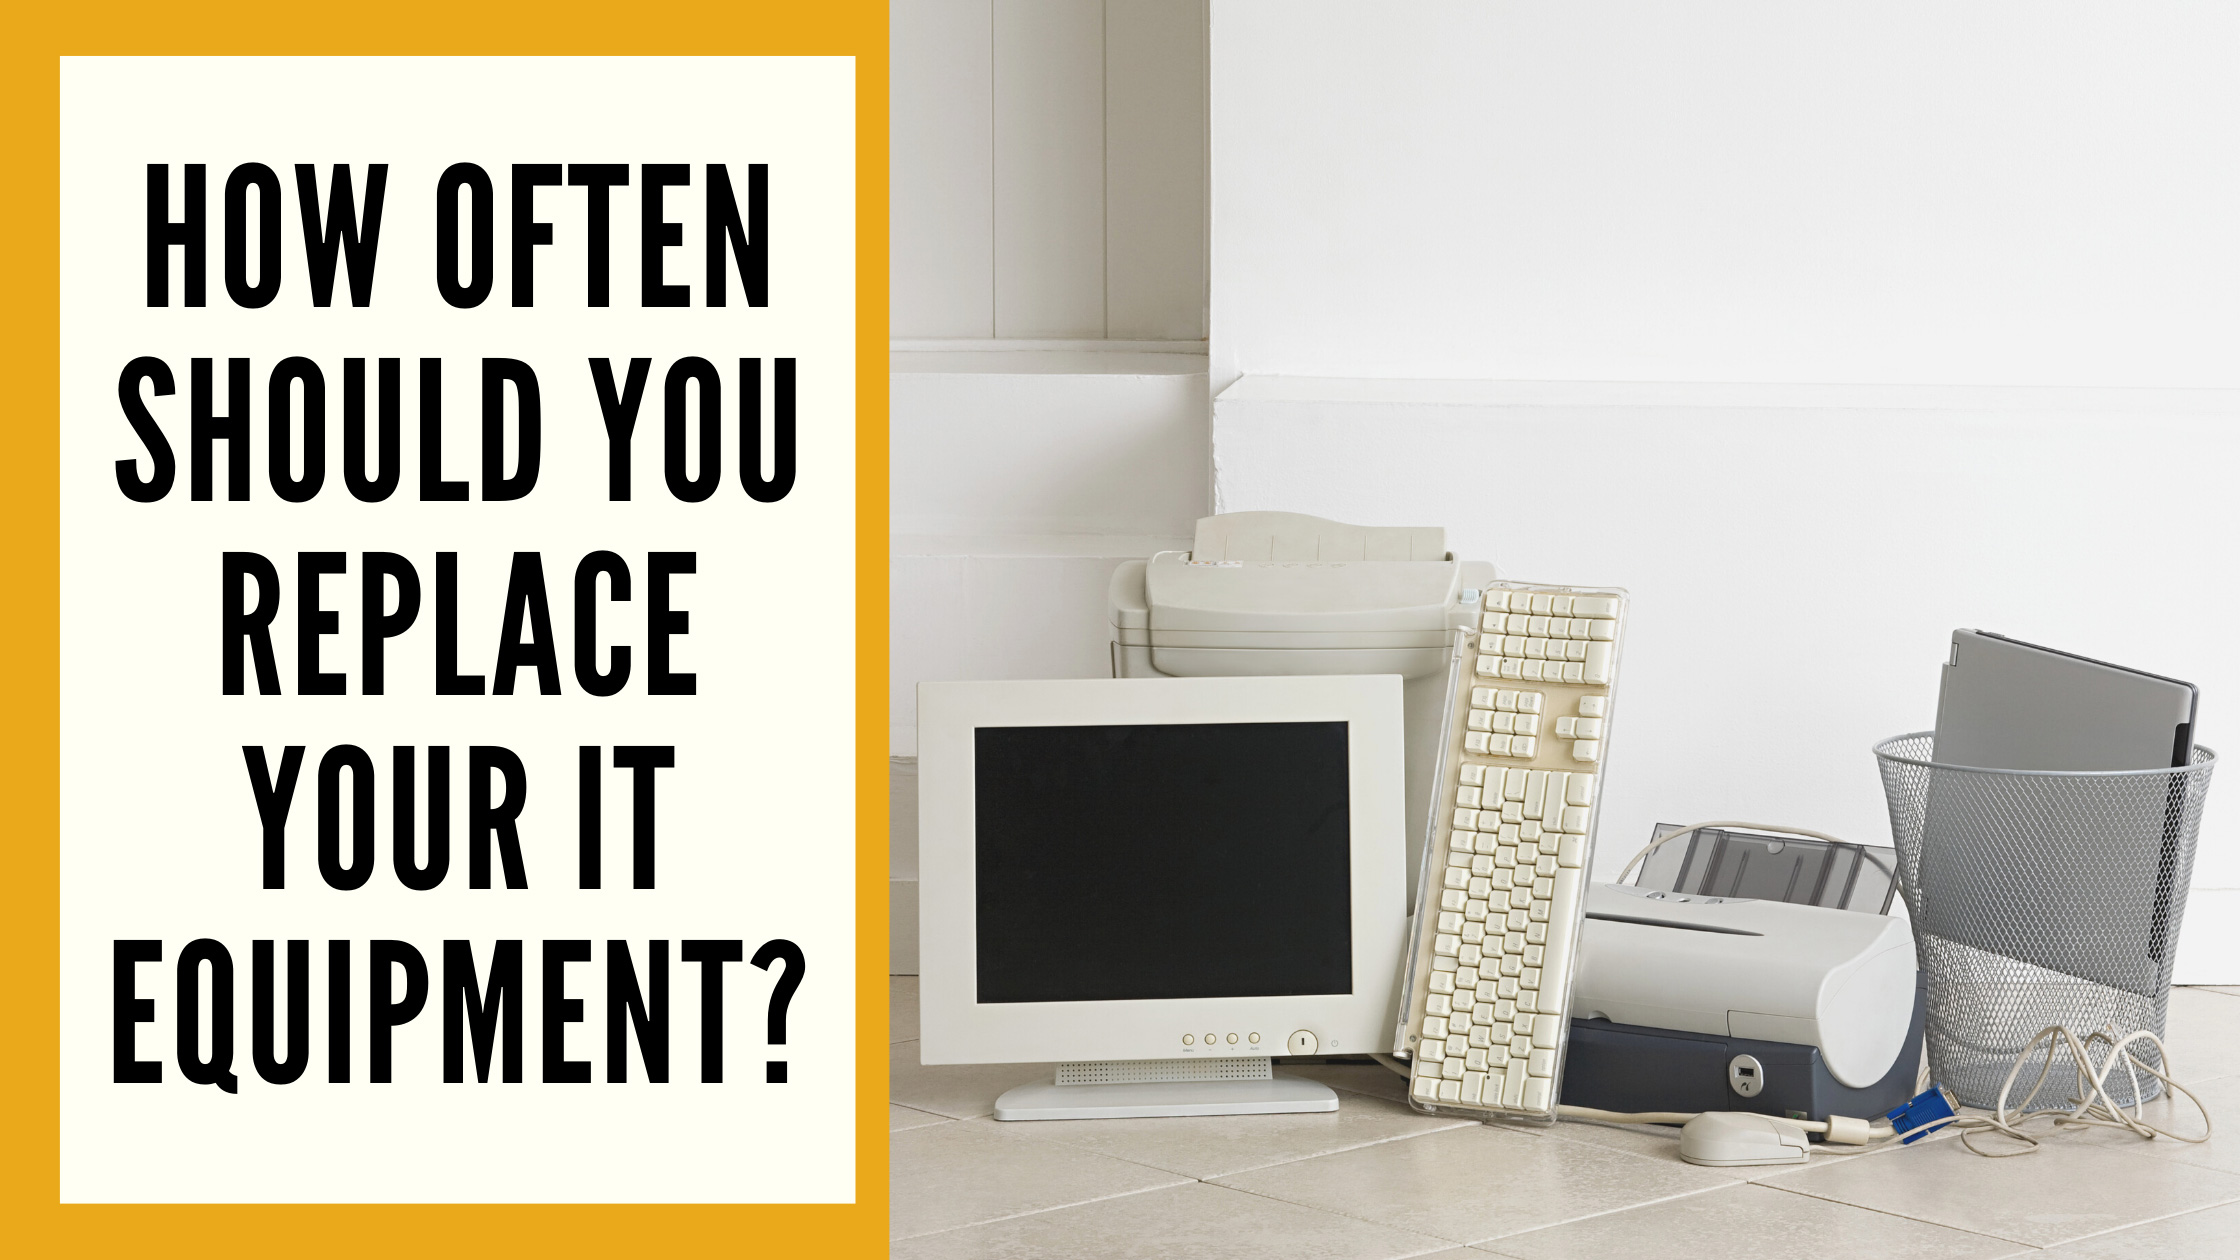 How often should you replace your IT equipment?